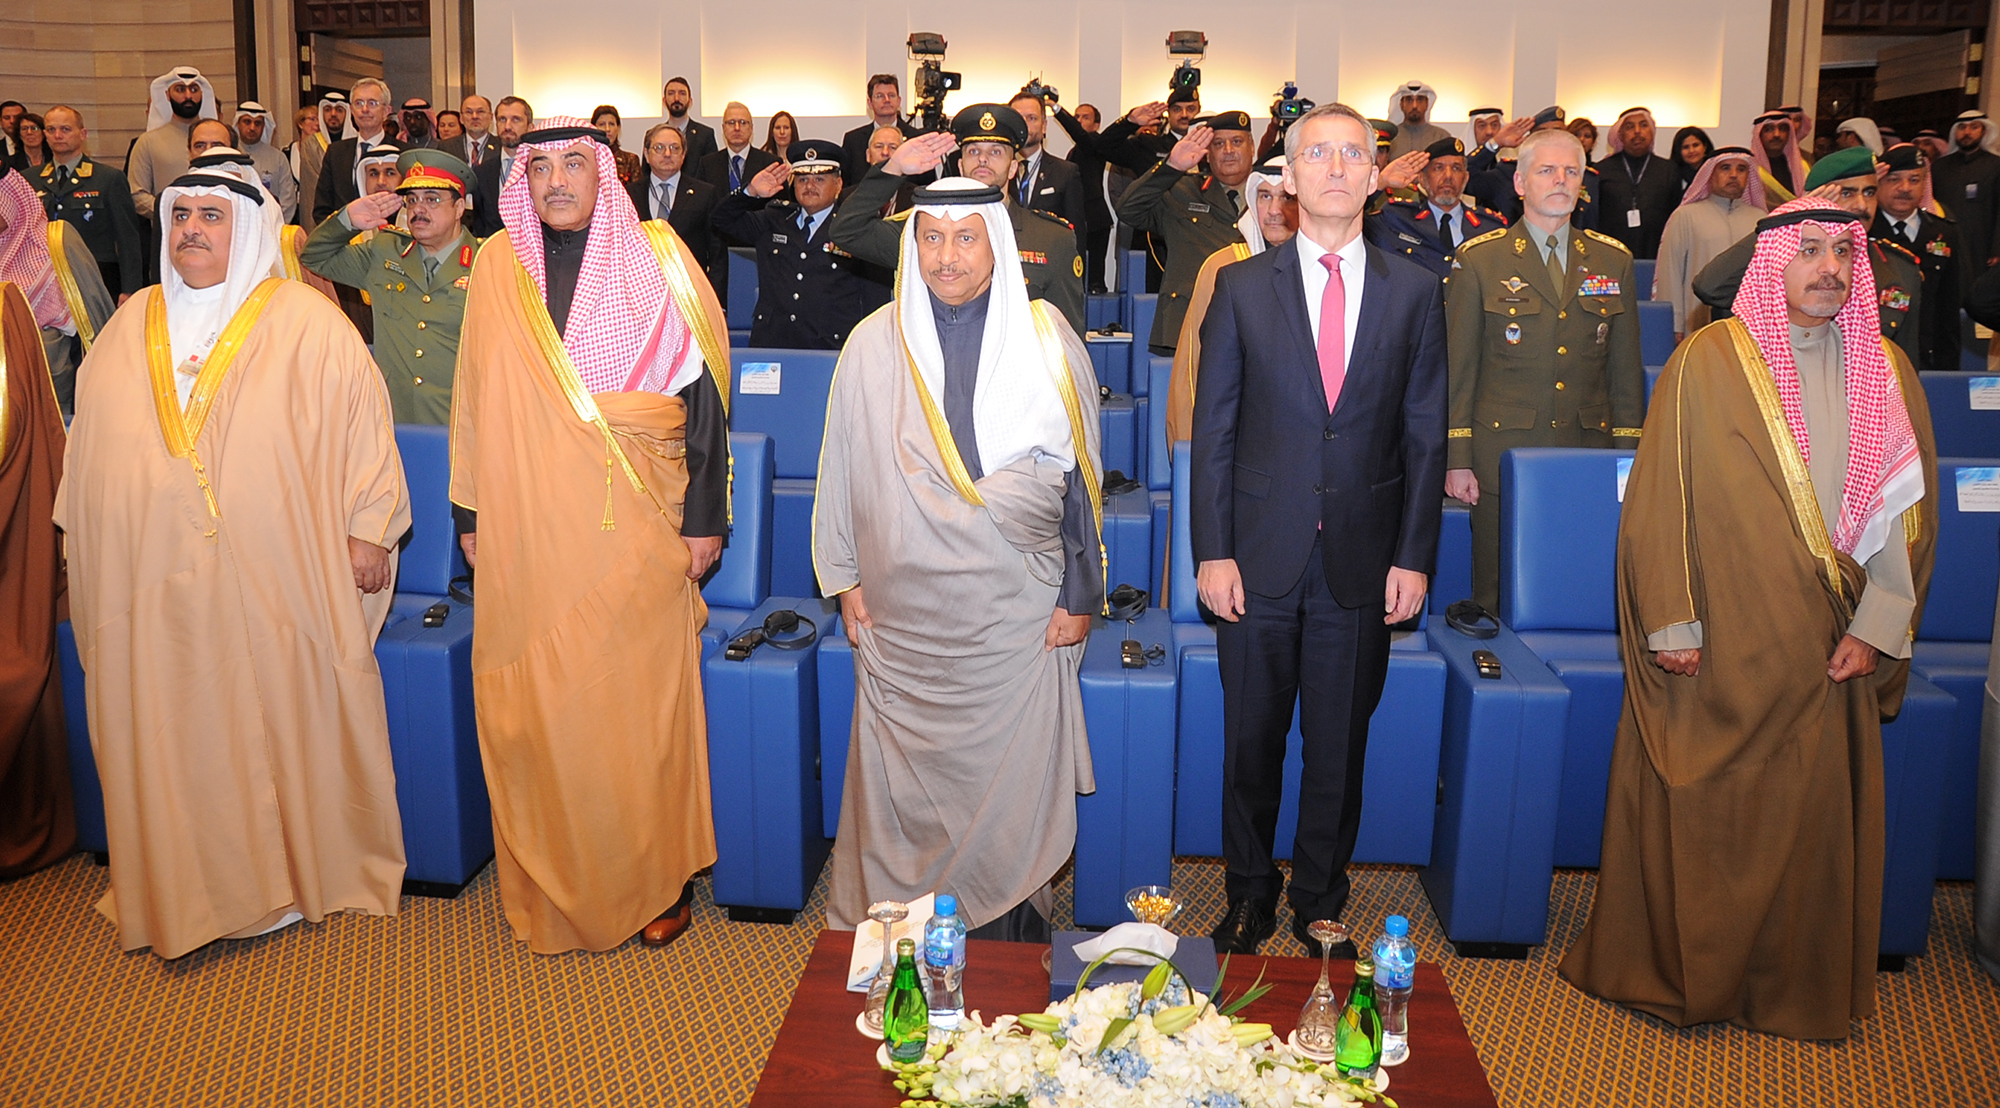 His Highness the Prime Minister Sheikh Jaber Al-Mubarak Al-Hamad Al-Sabah attends the opening of the North Atlantic Treaty Organization's (NATO) Istanbul Cooperation Initiative (ICI) Regional Center